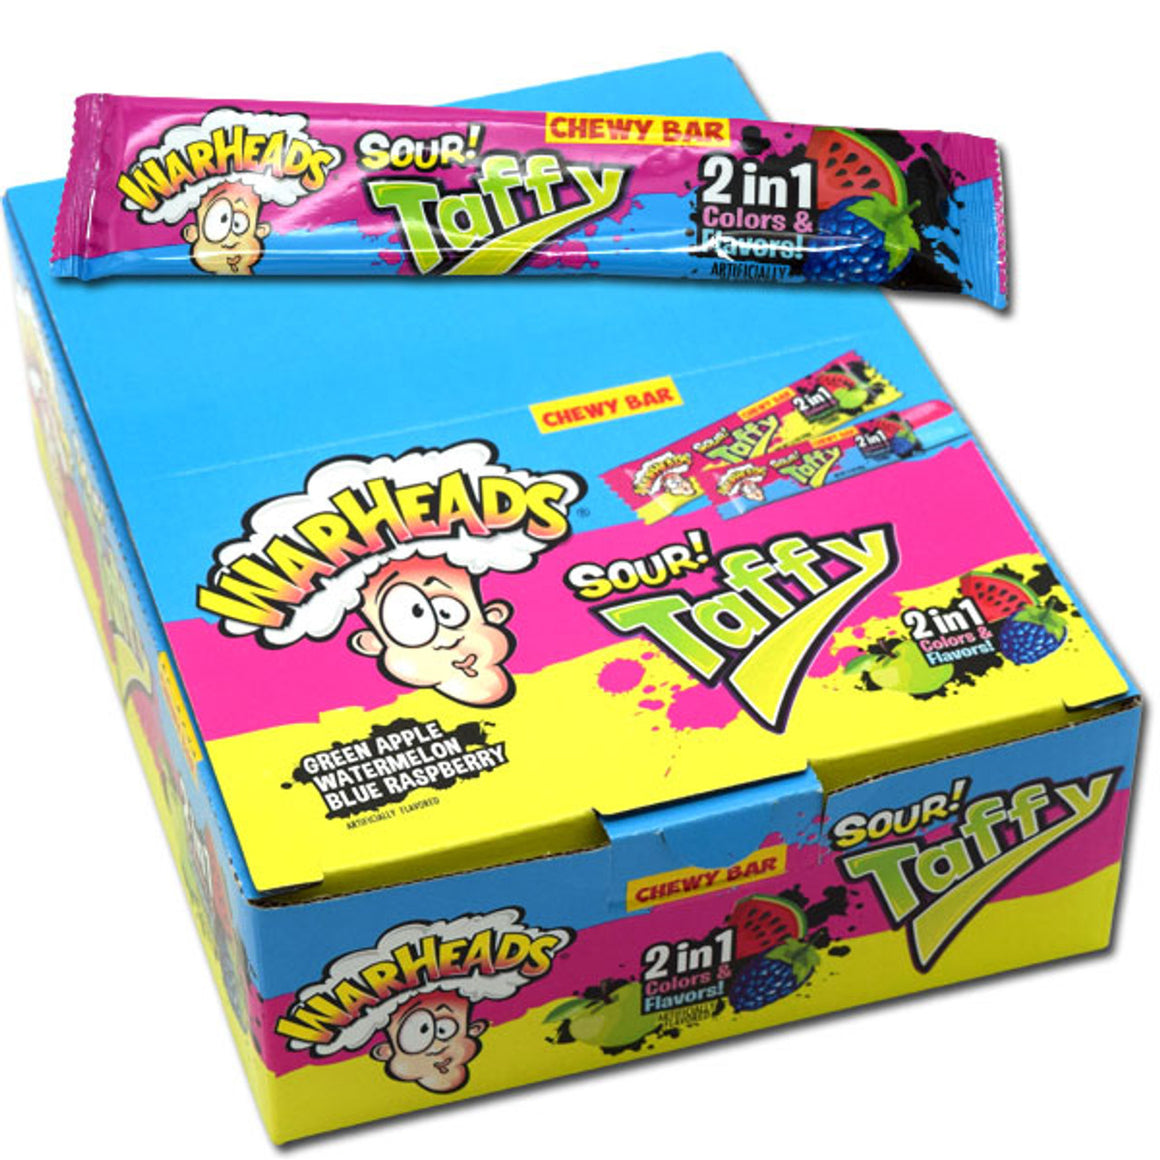 SWEETARTS Extreme Sour Chewy Candy 1.65 oz. Wrapper, Packaged Candy